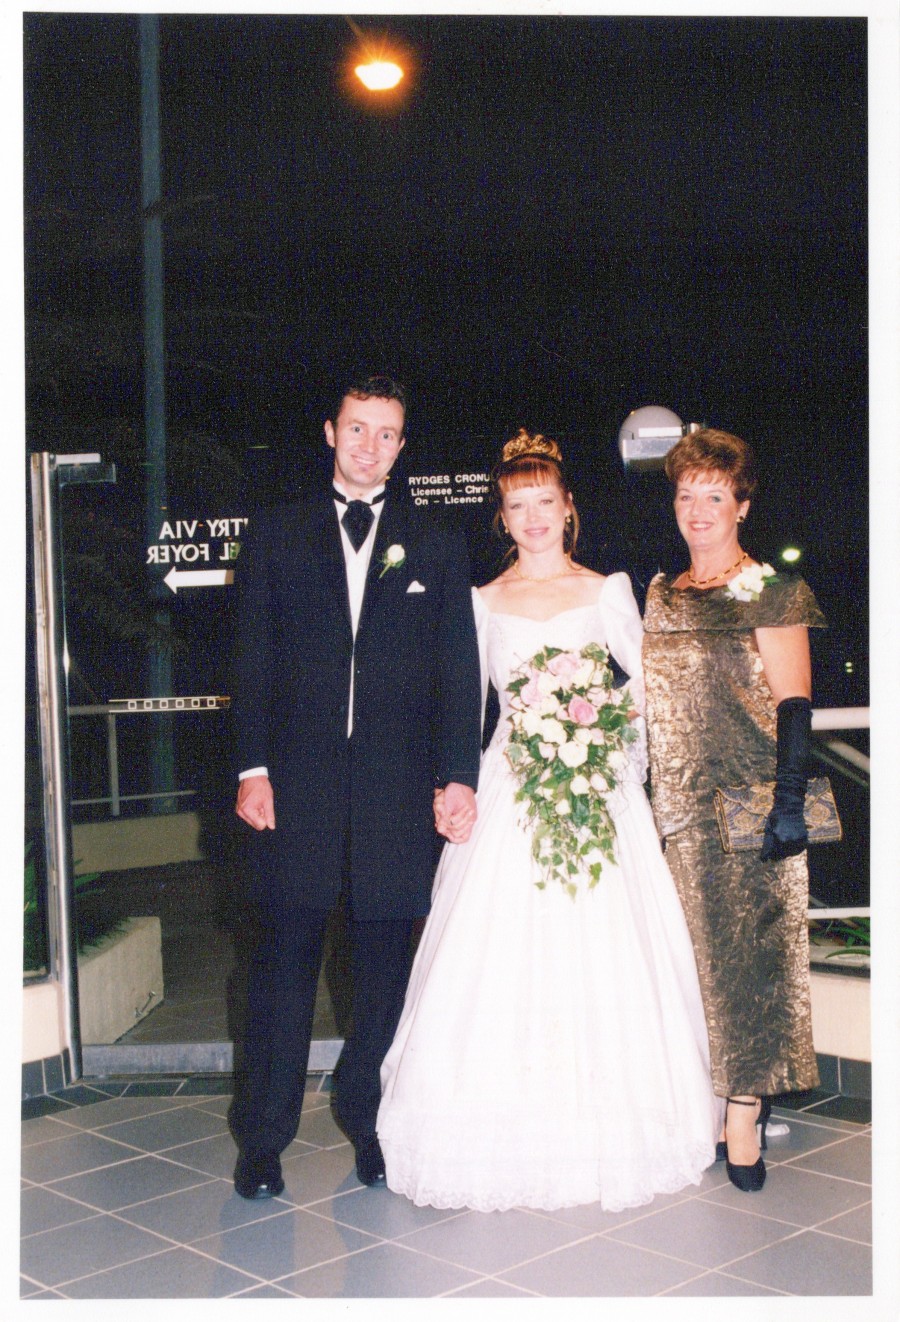 Fil, Natalie and I on their wedding day